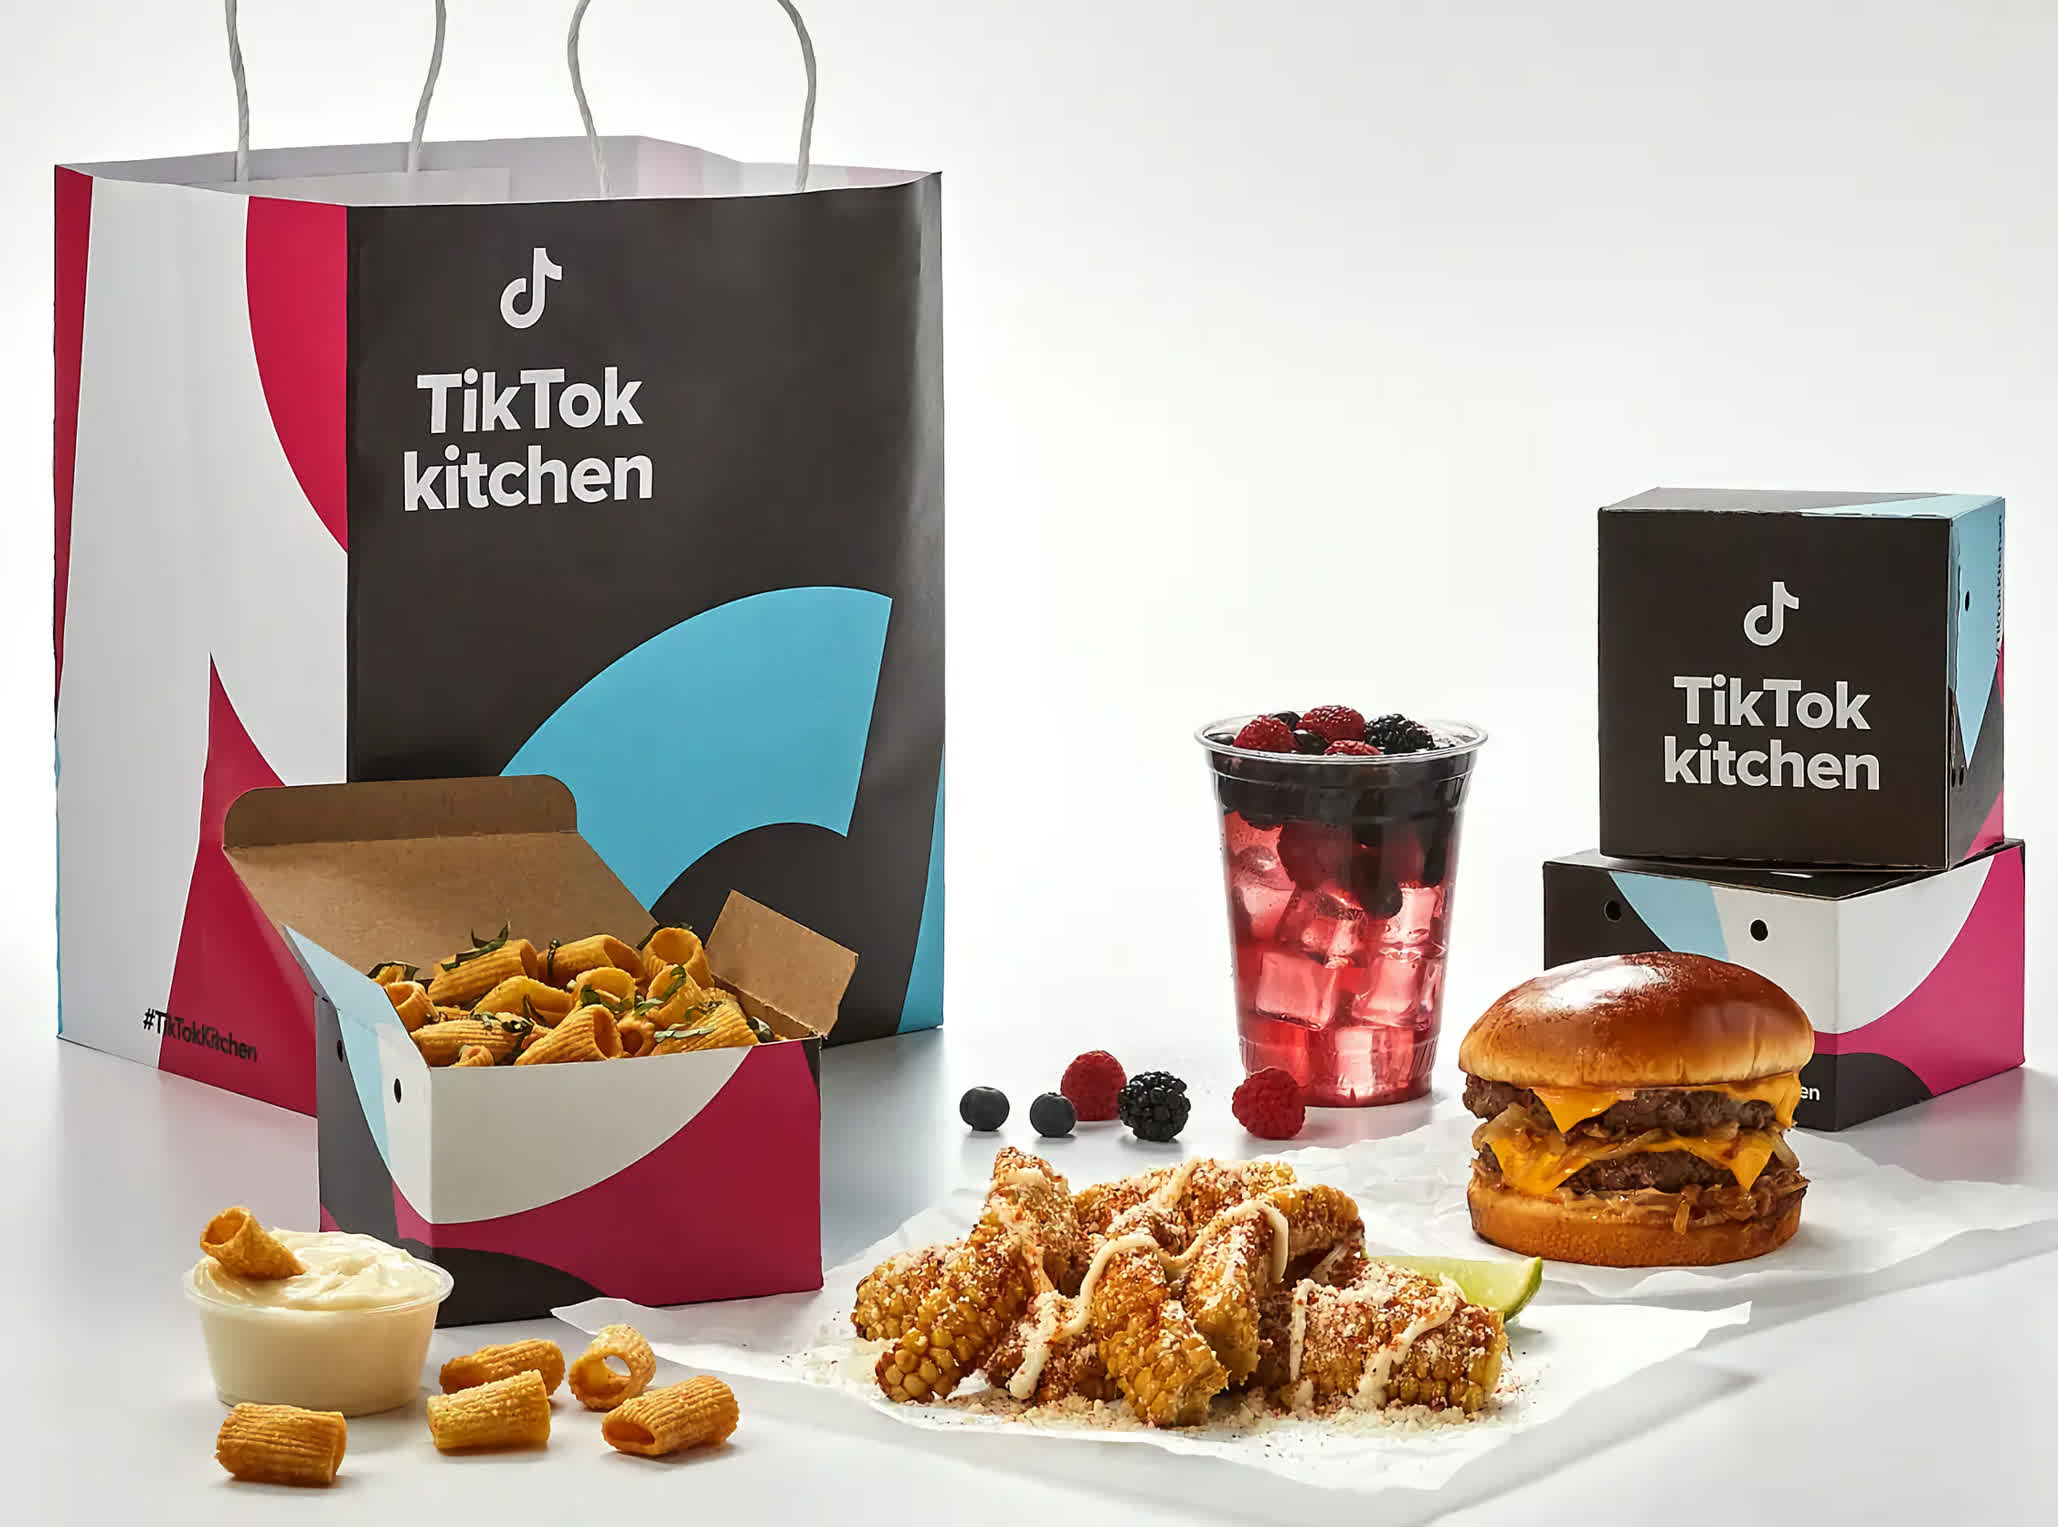 TikTok is opening 300 ghost kitchens to deliver food trends made famous by creators